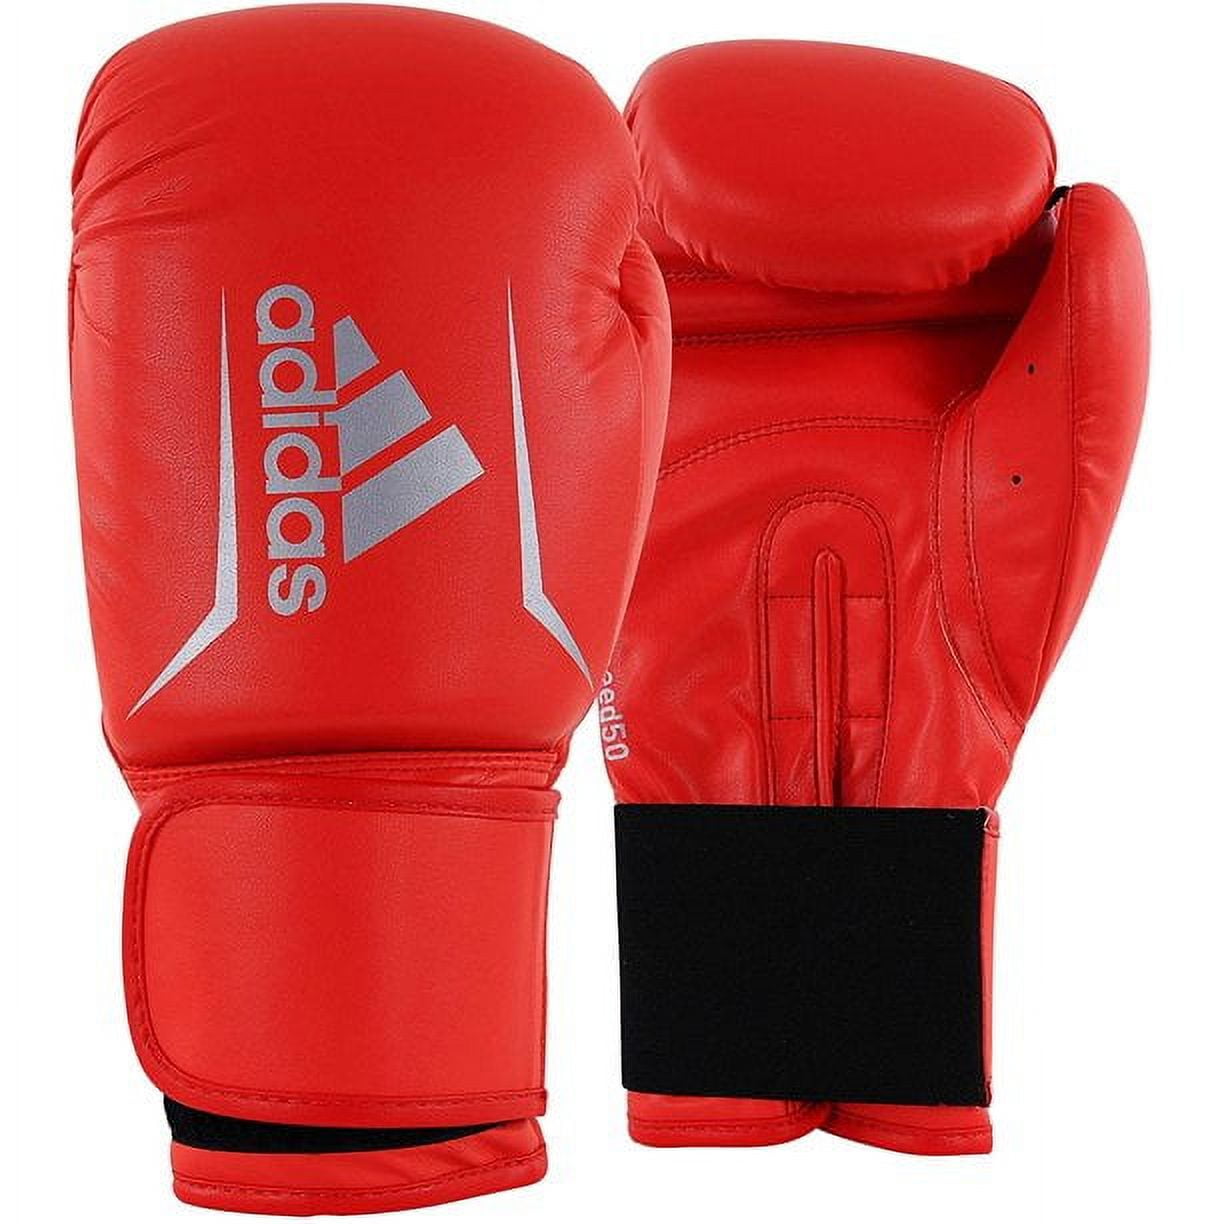 Solar Gloves and & 50 FLX Men for Speed Silver Heavy 12oz Training, Women and for Red, Gym, Kickboxing Light 3.0 adidas Punching, Bags. Fitness Boxing Sparring,